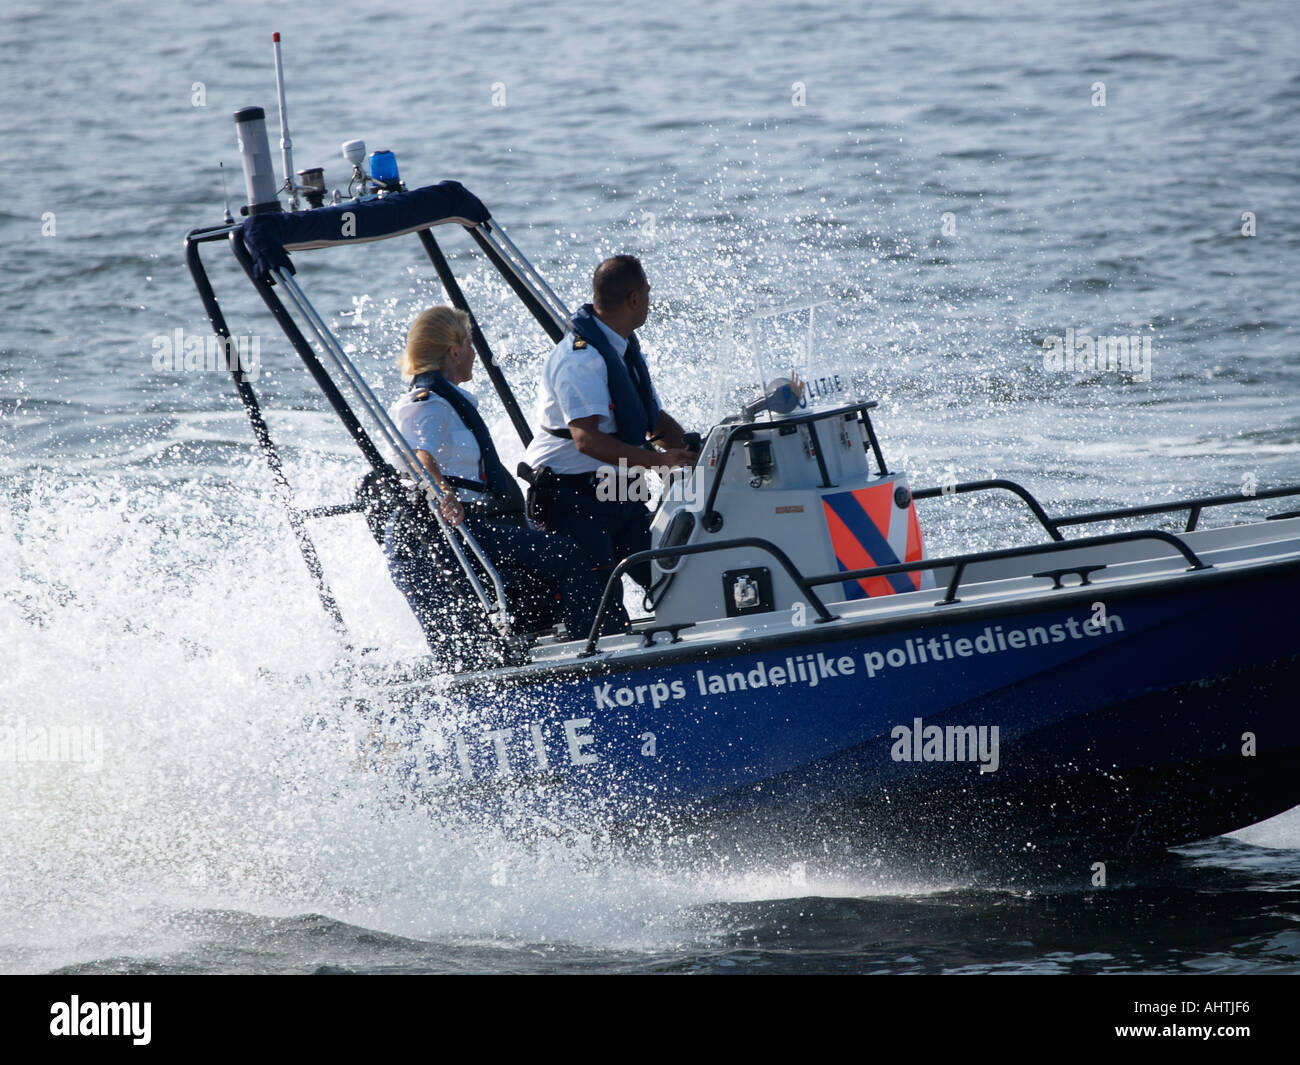 High Speed Boat Of The Dutch Water Police With 2 Officers On Board One Male One Female Amsterdam